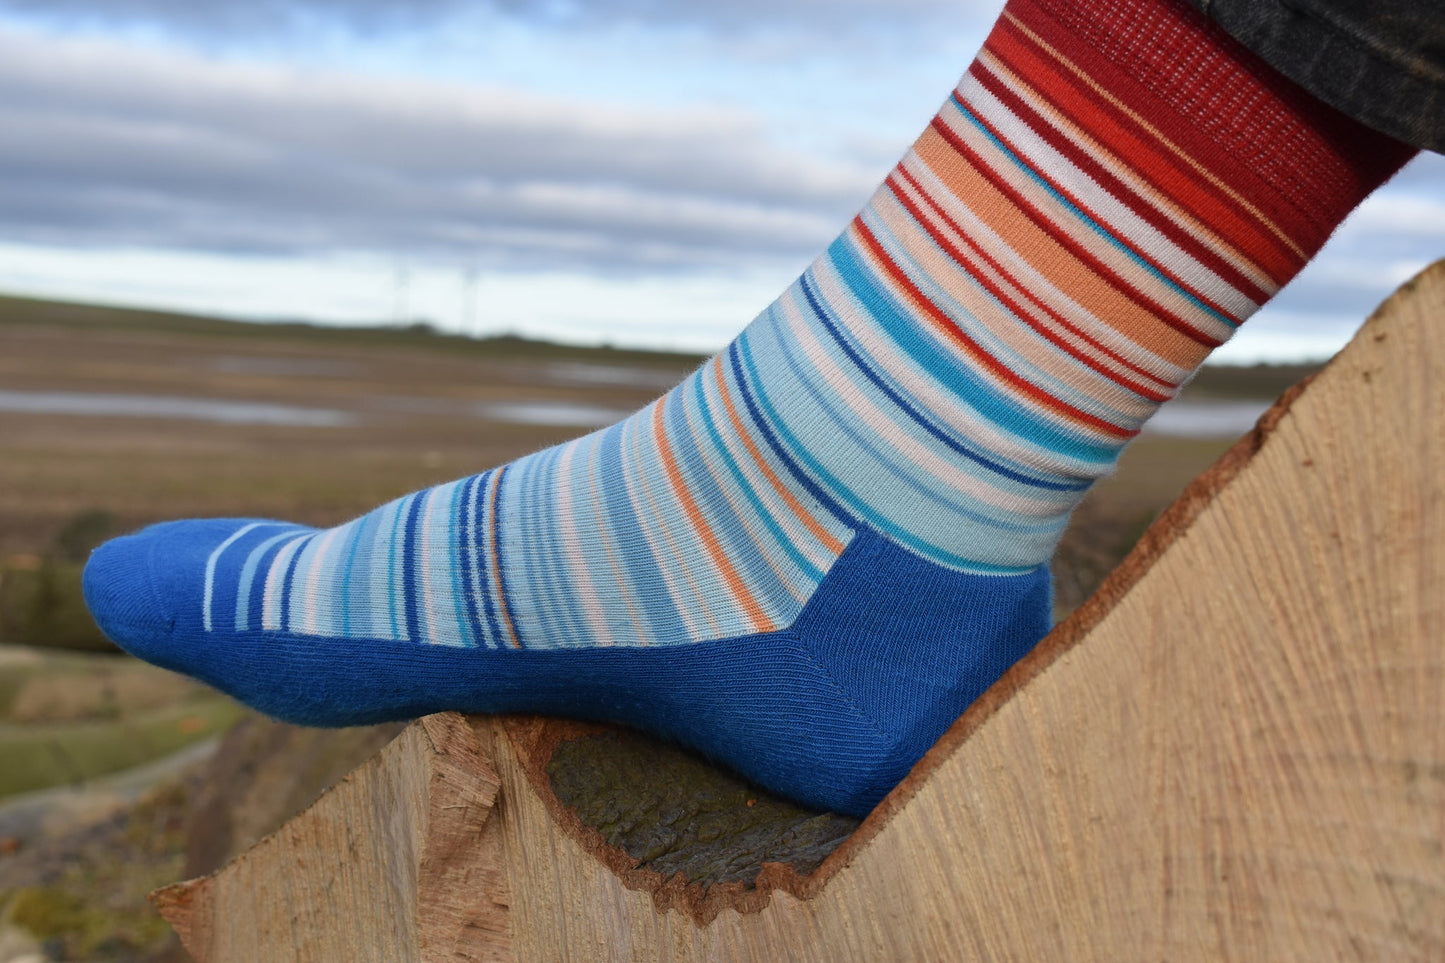 A pair of combed cotton socks with the climate stripes pattern